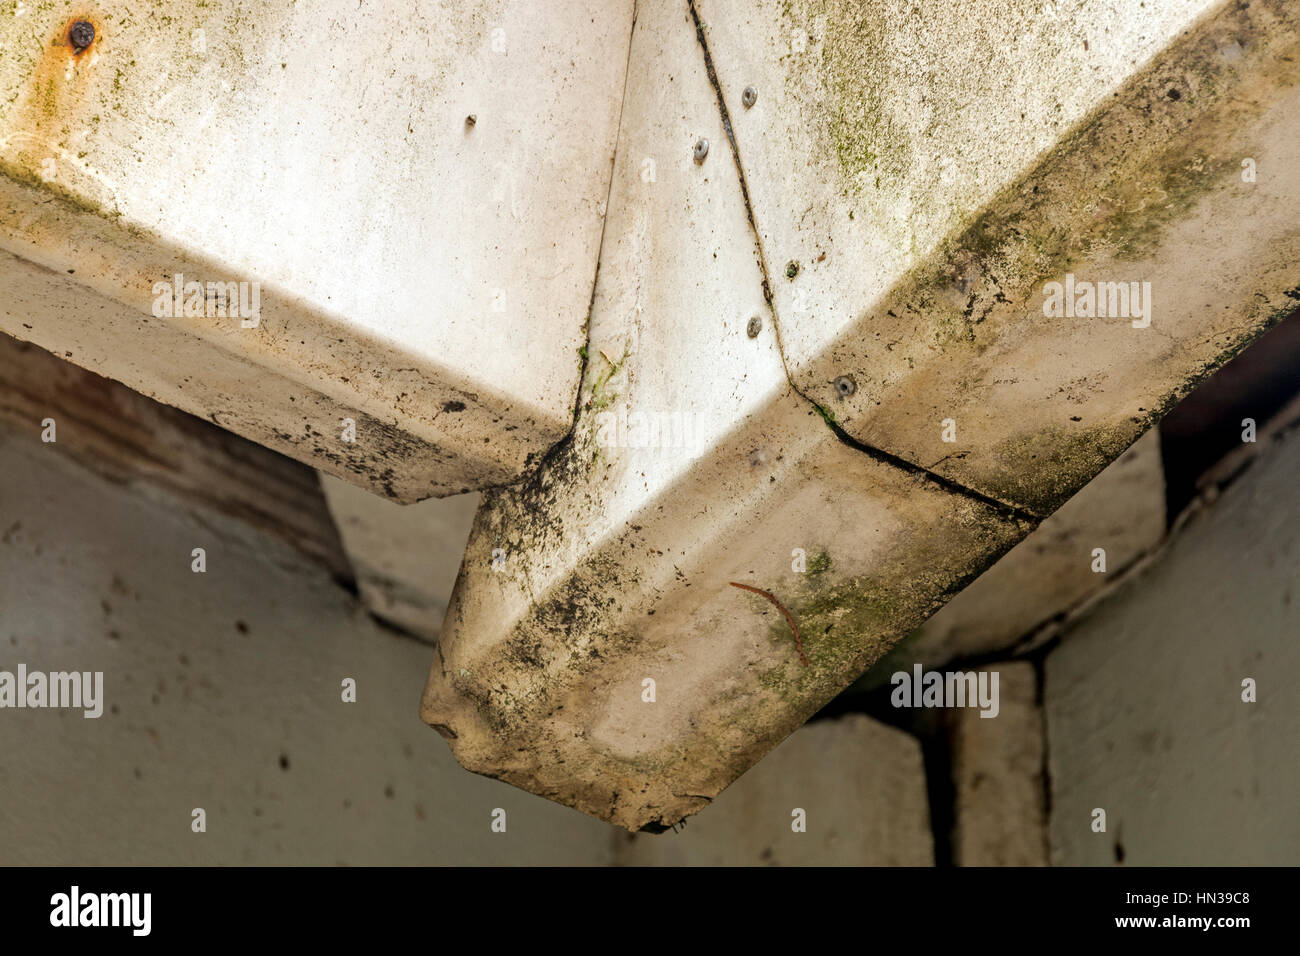 Close up view of old  mouldy neglected and grungy facia boards in need of maintenance Stock Photo